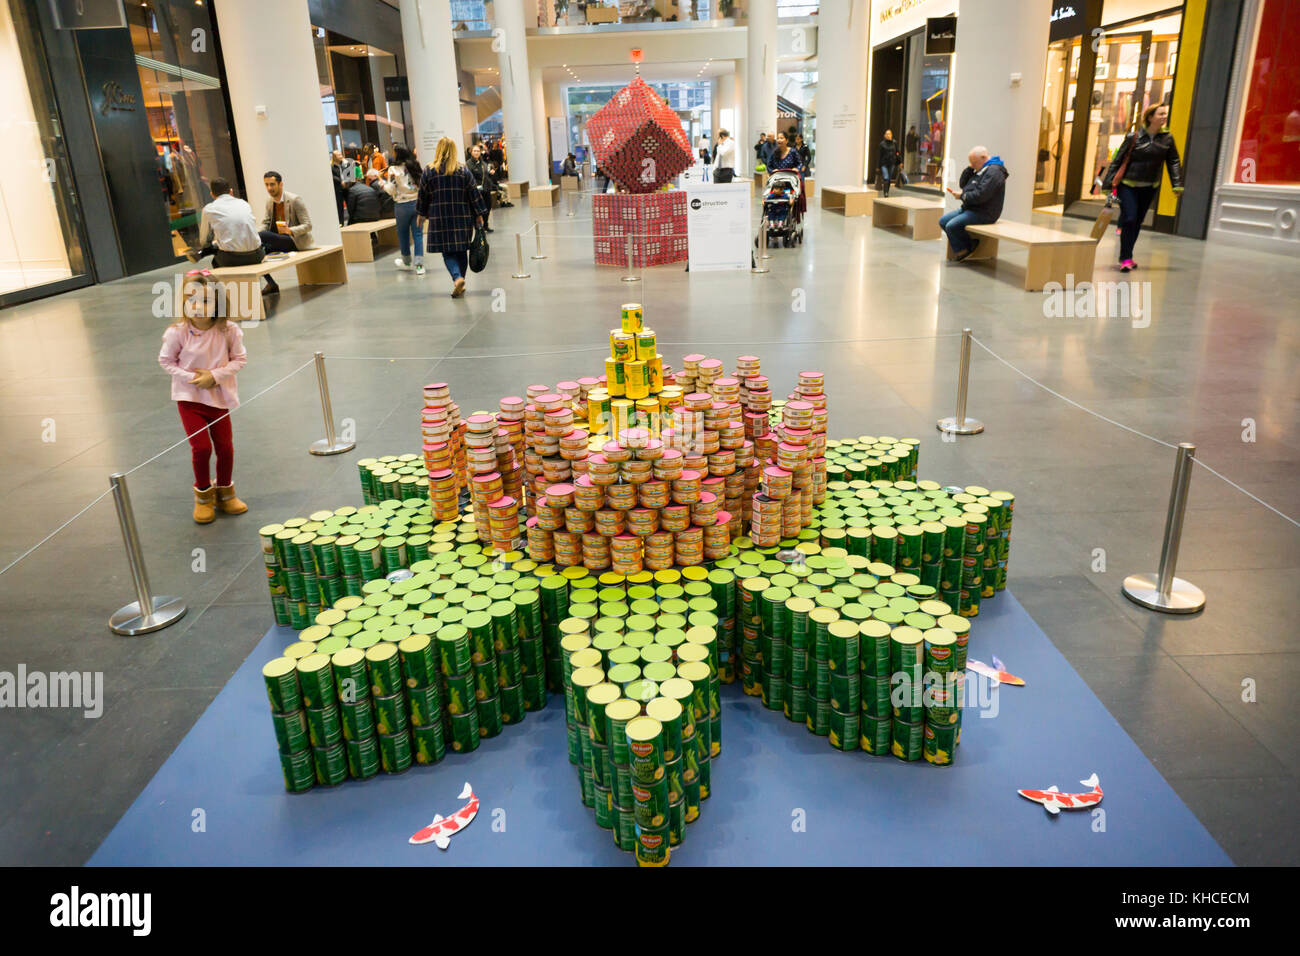 May Kindness Bloom by AKF Engineers in the 25th annual Canstruction Design Competition in New York, seen on Tuesday, November 7, 2017, on display in Brookfield Place in New York. Architecture and design firm participate to design and build giant structures made from cans of food.  The cans are donated to City Harvest at the close of the exhibit. Over 100,000 cans of food are collected and will be used to feed the needy at 500 soup kitchens and food pantries. (© Richard B. Levine) Stock Photo